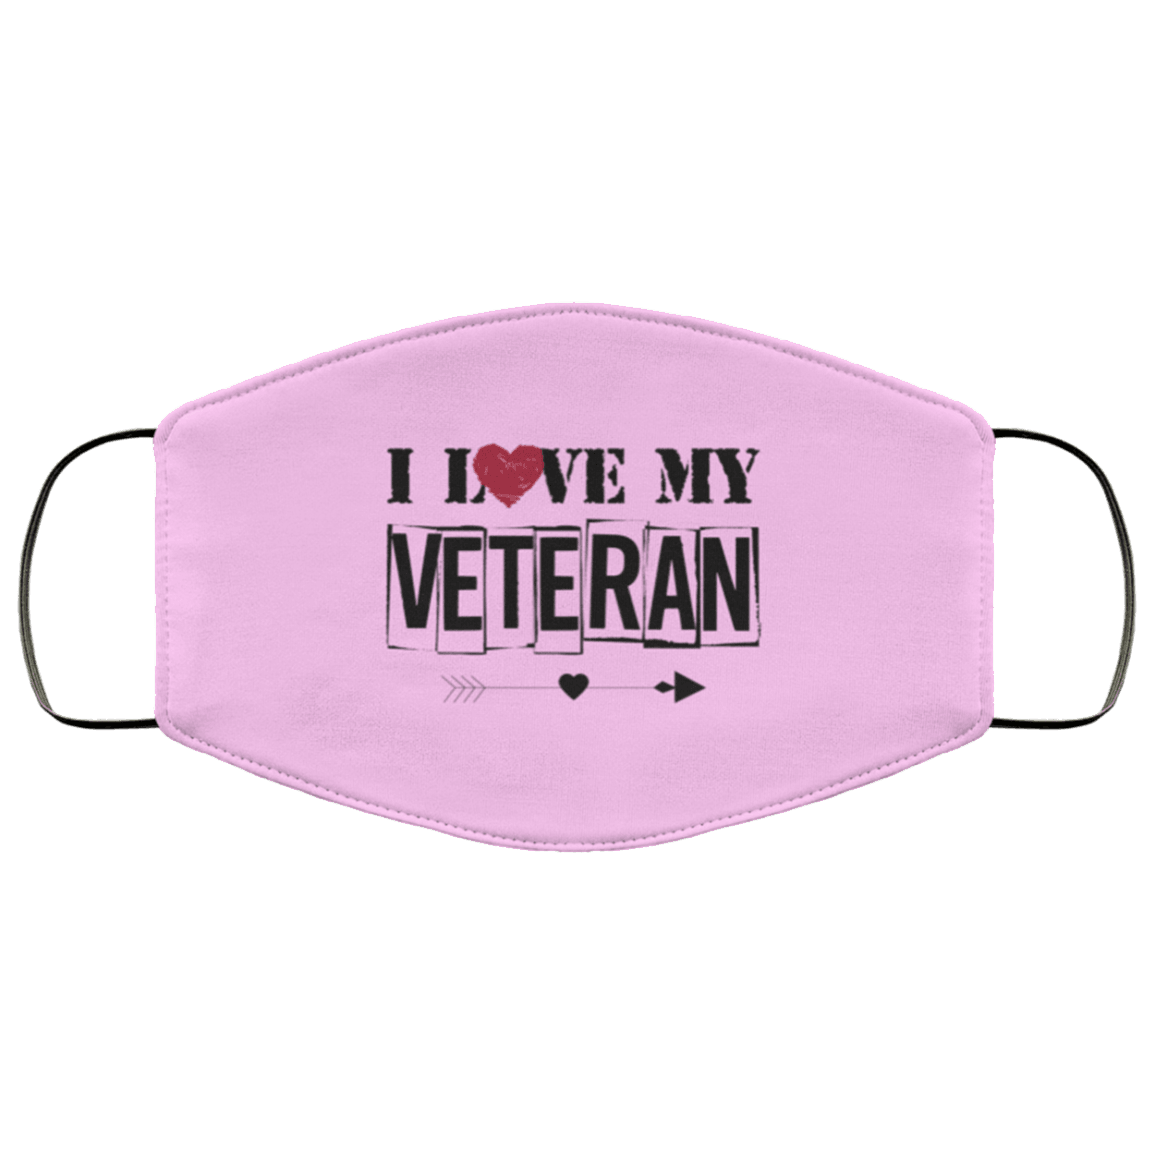 Designs by MyUtopia Shout Out:I Love My Veteran Adult Fabric Face Mask with Elastic Ear Loops,2 Layers Fabric Face Mask / Pink Blush / Adult,Fabric Face Mask